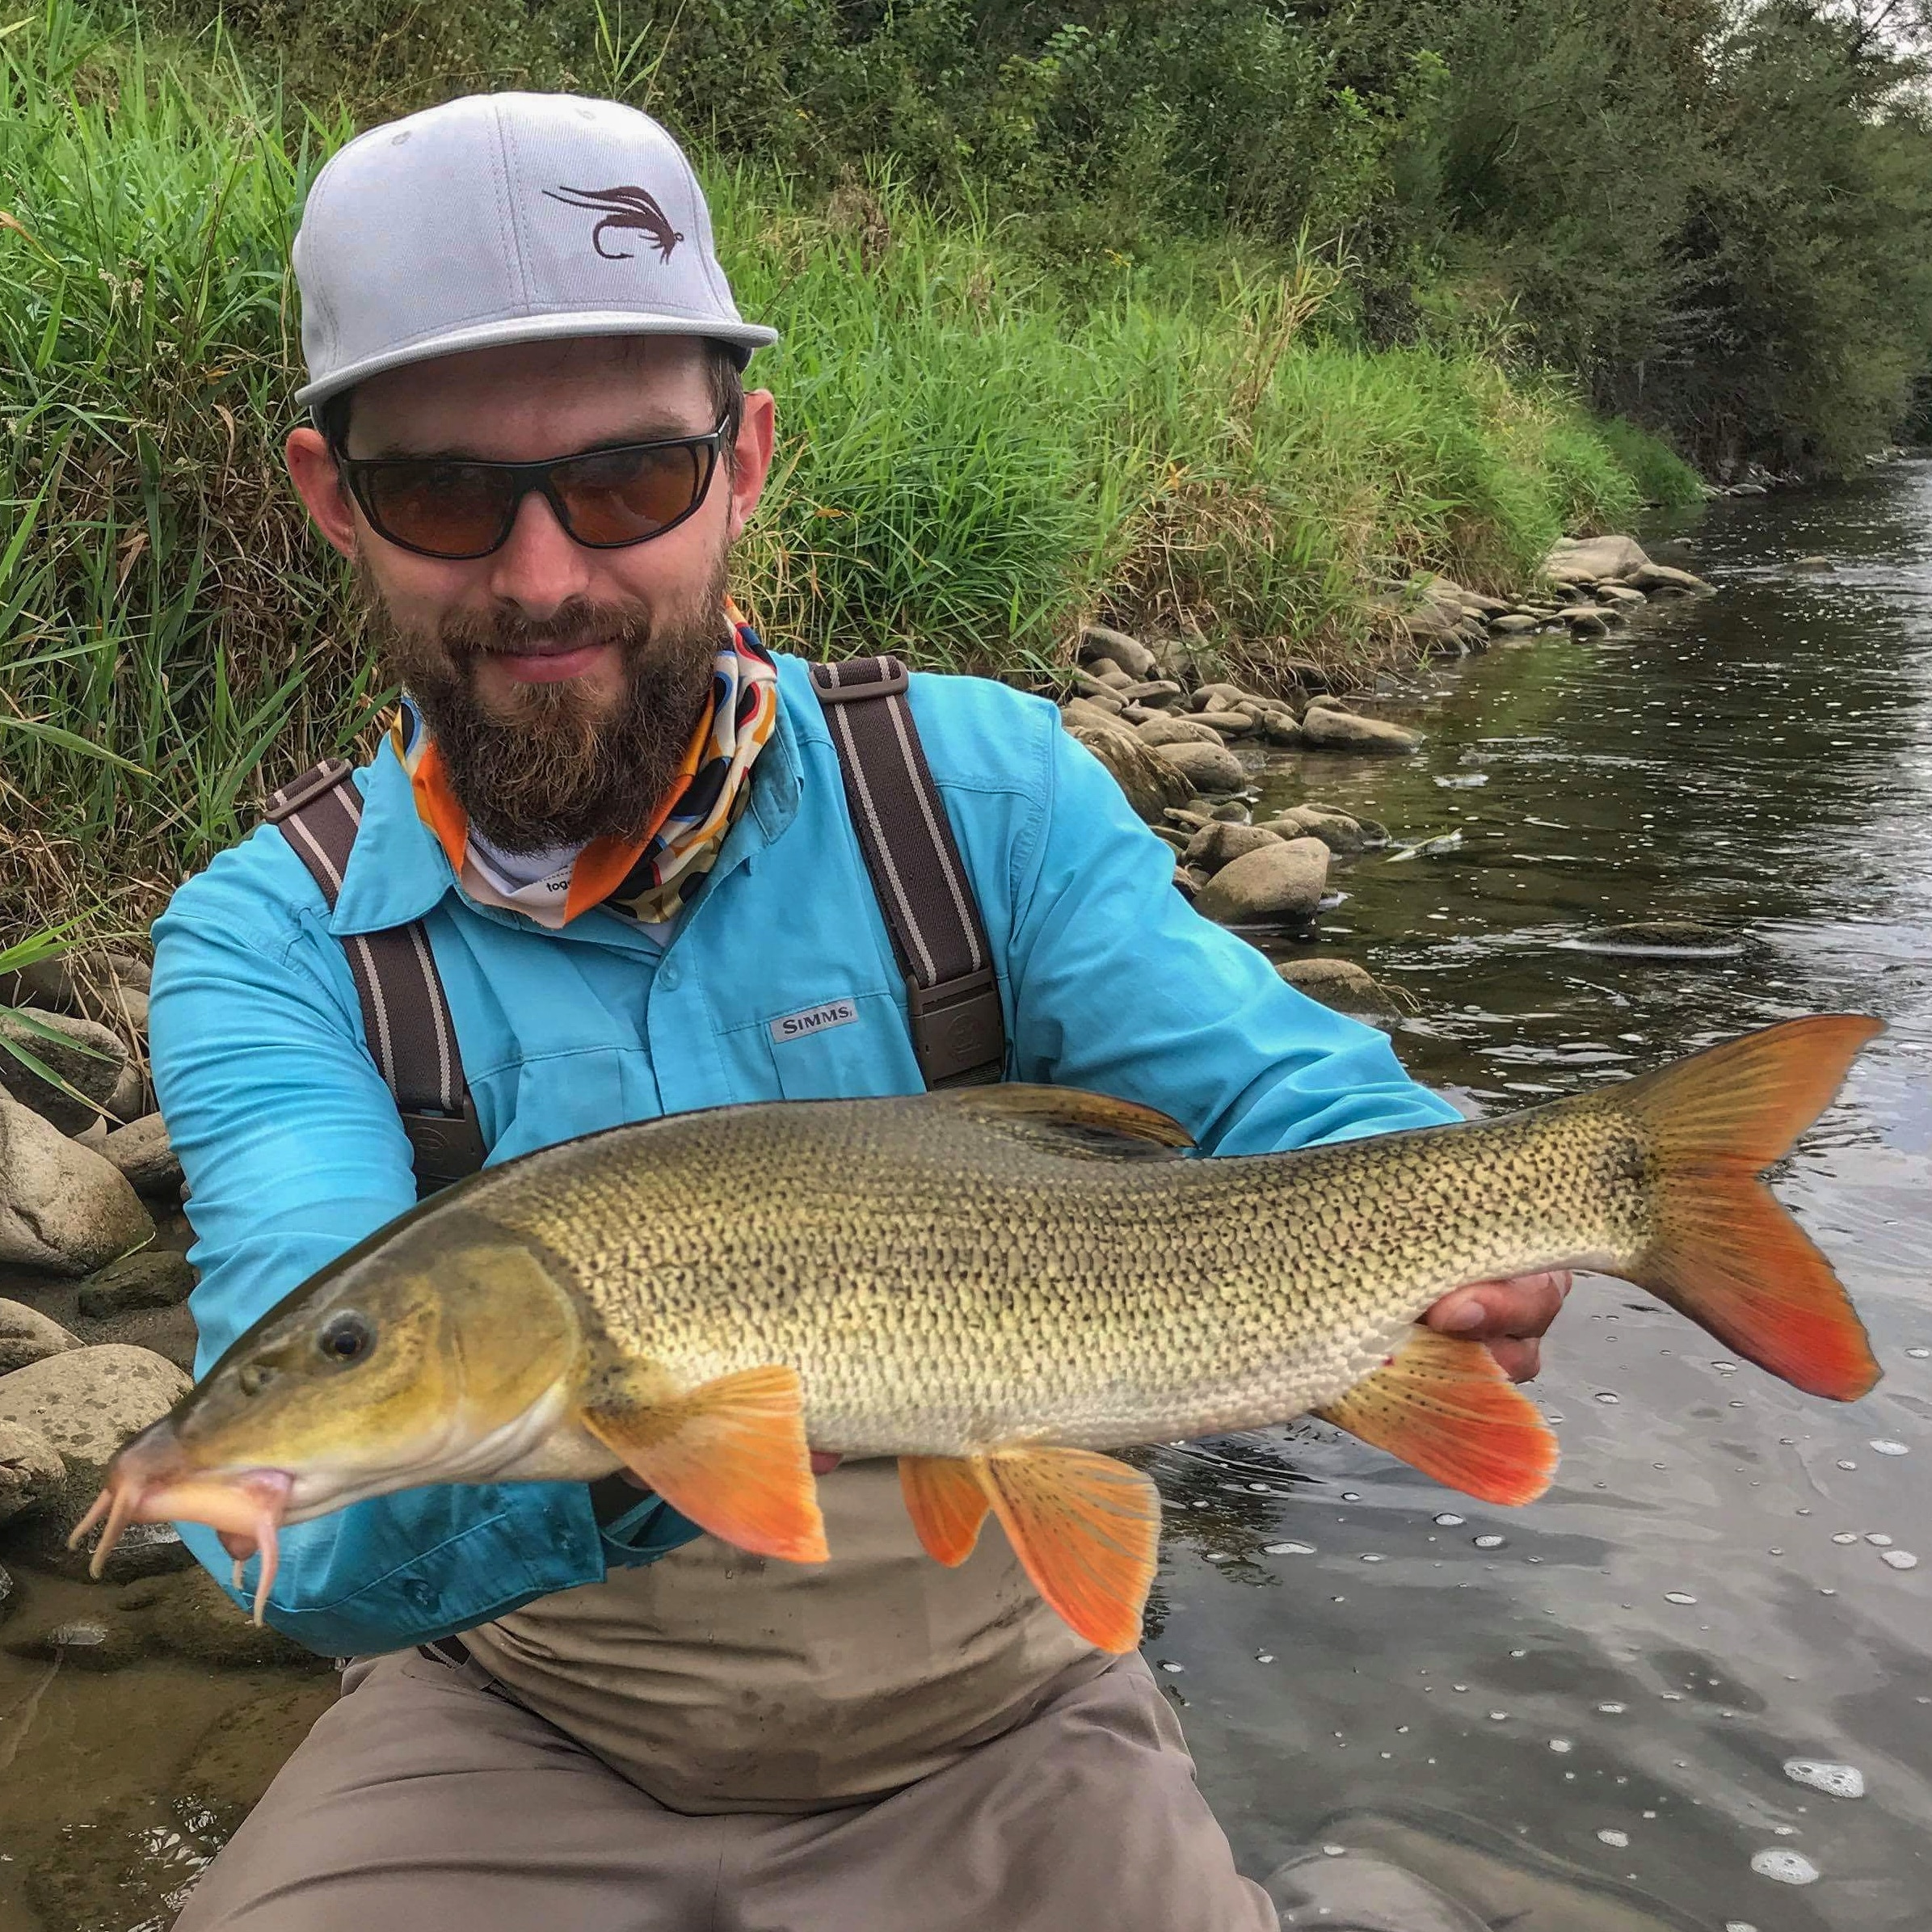 Poprad River and Barbel fishing - fly fishing Guide Poland